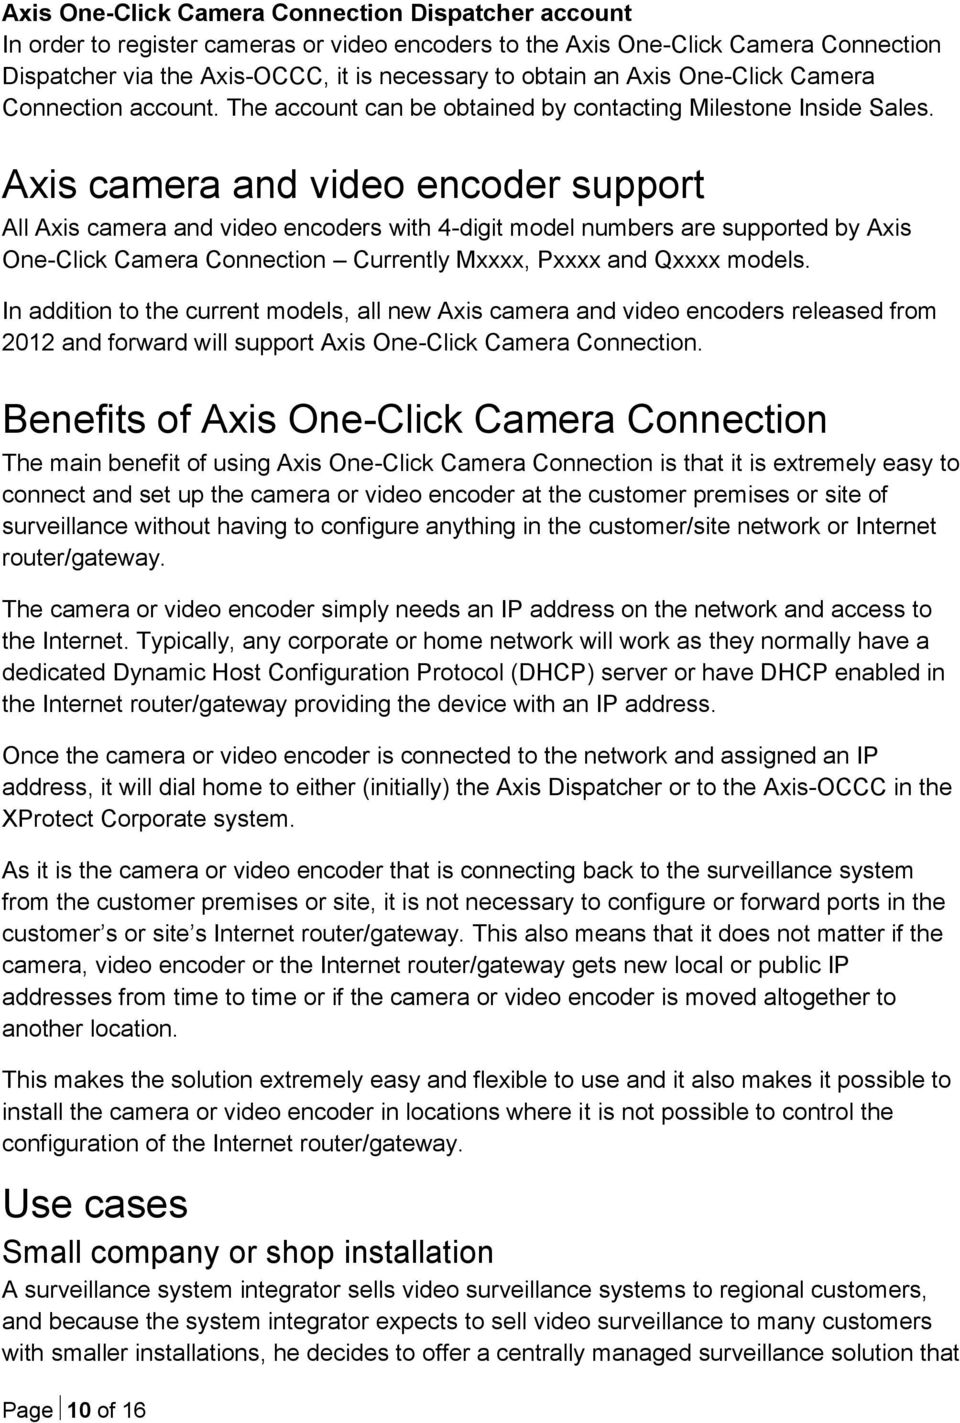 Axis camera and video encoder support All Axis camera and video encoders with 4-digit model numbers are supported by Axis One-Click Camera Connection Currently Mxxxx, Pxxxx and Qxxxx models.